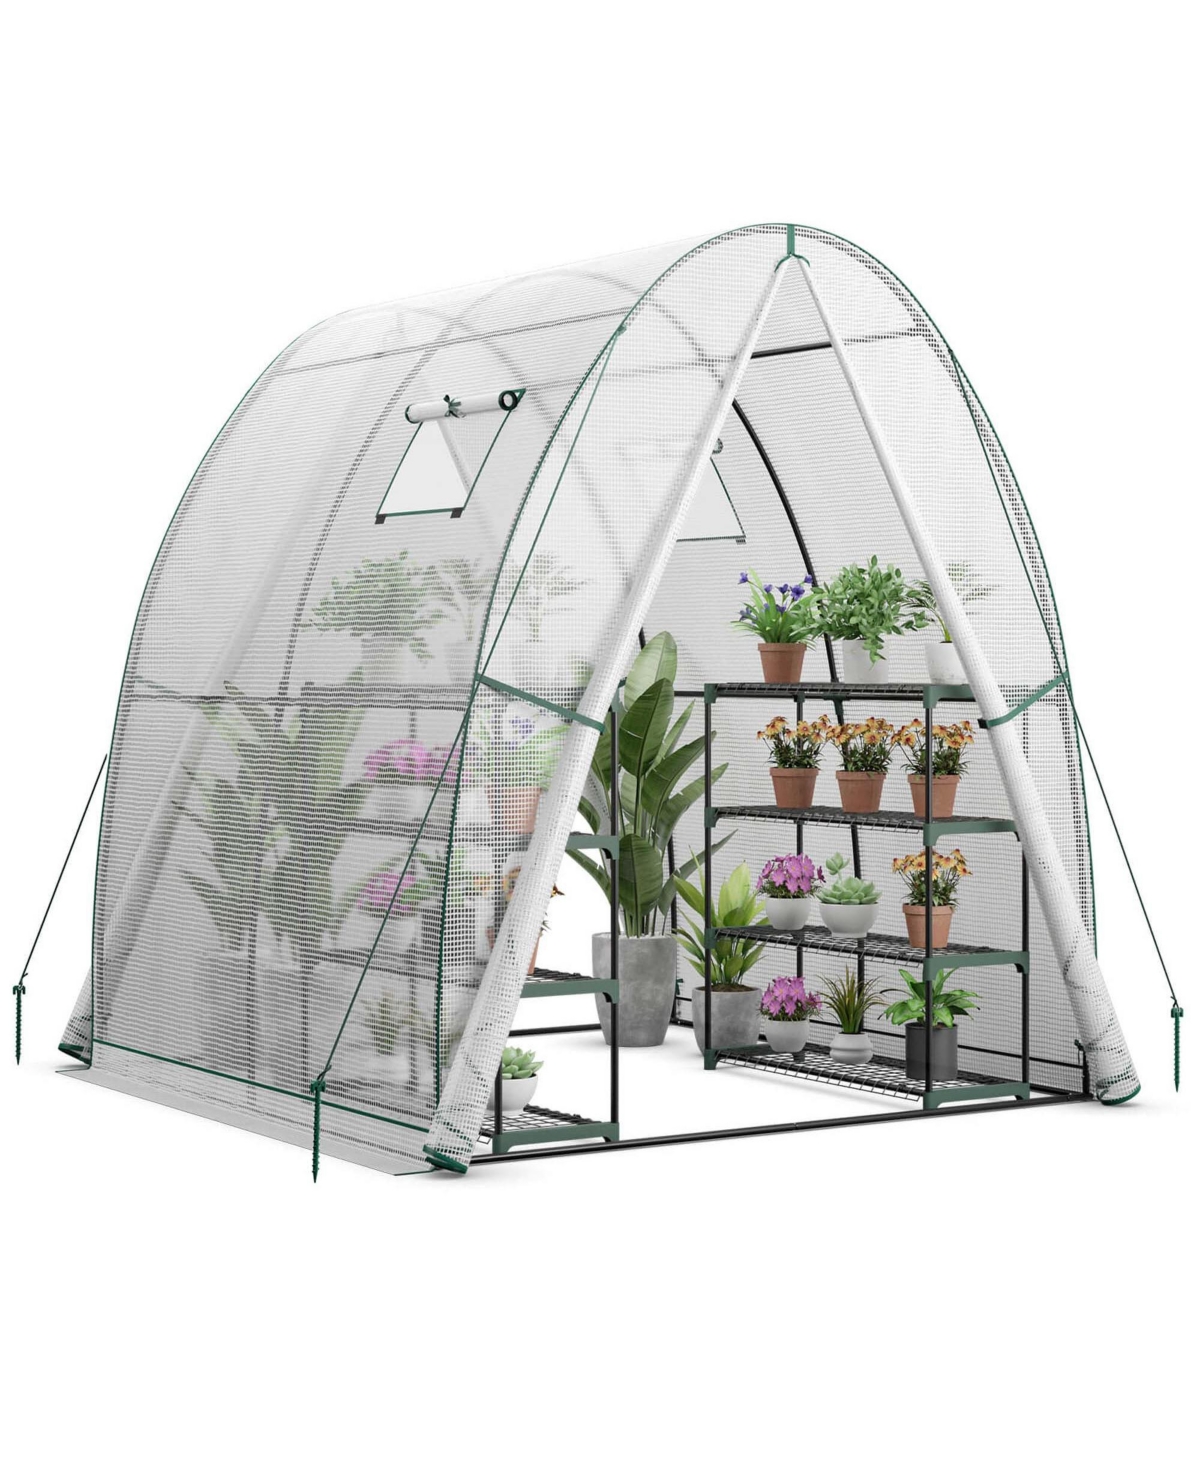 Portable Greenhouse with 2 Zippered Doors 2 Roll-up Screen Windows - White